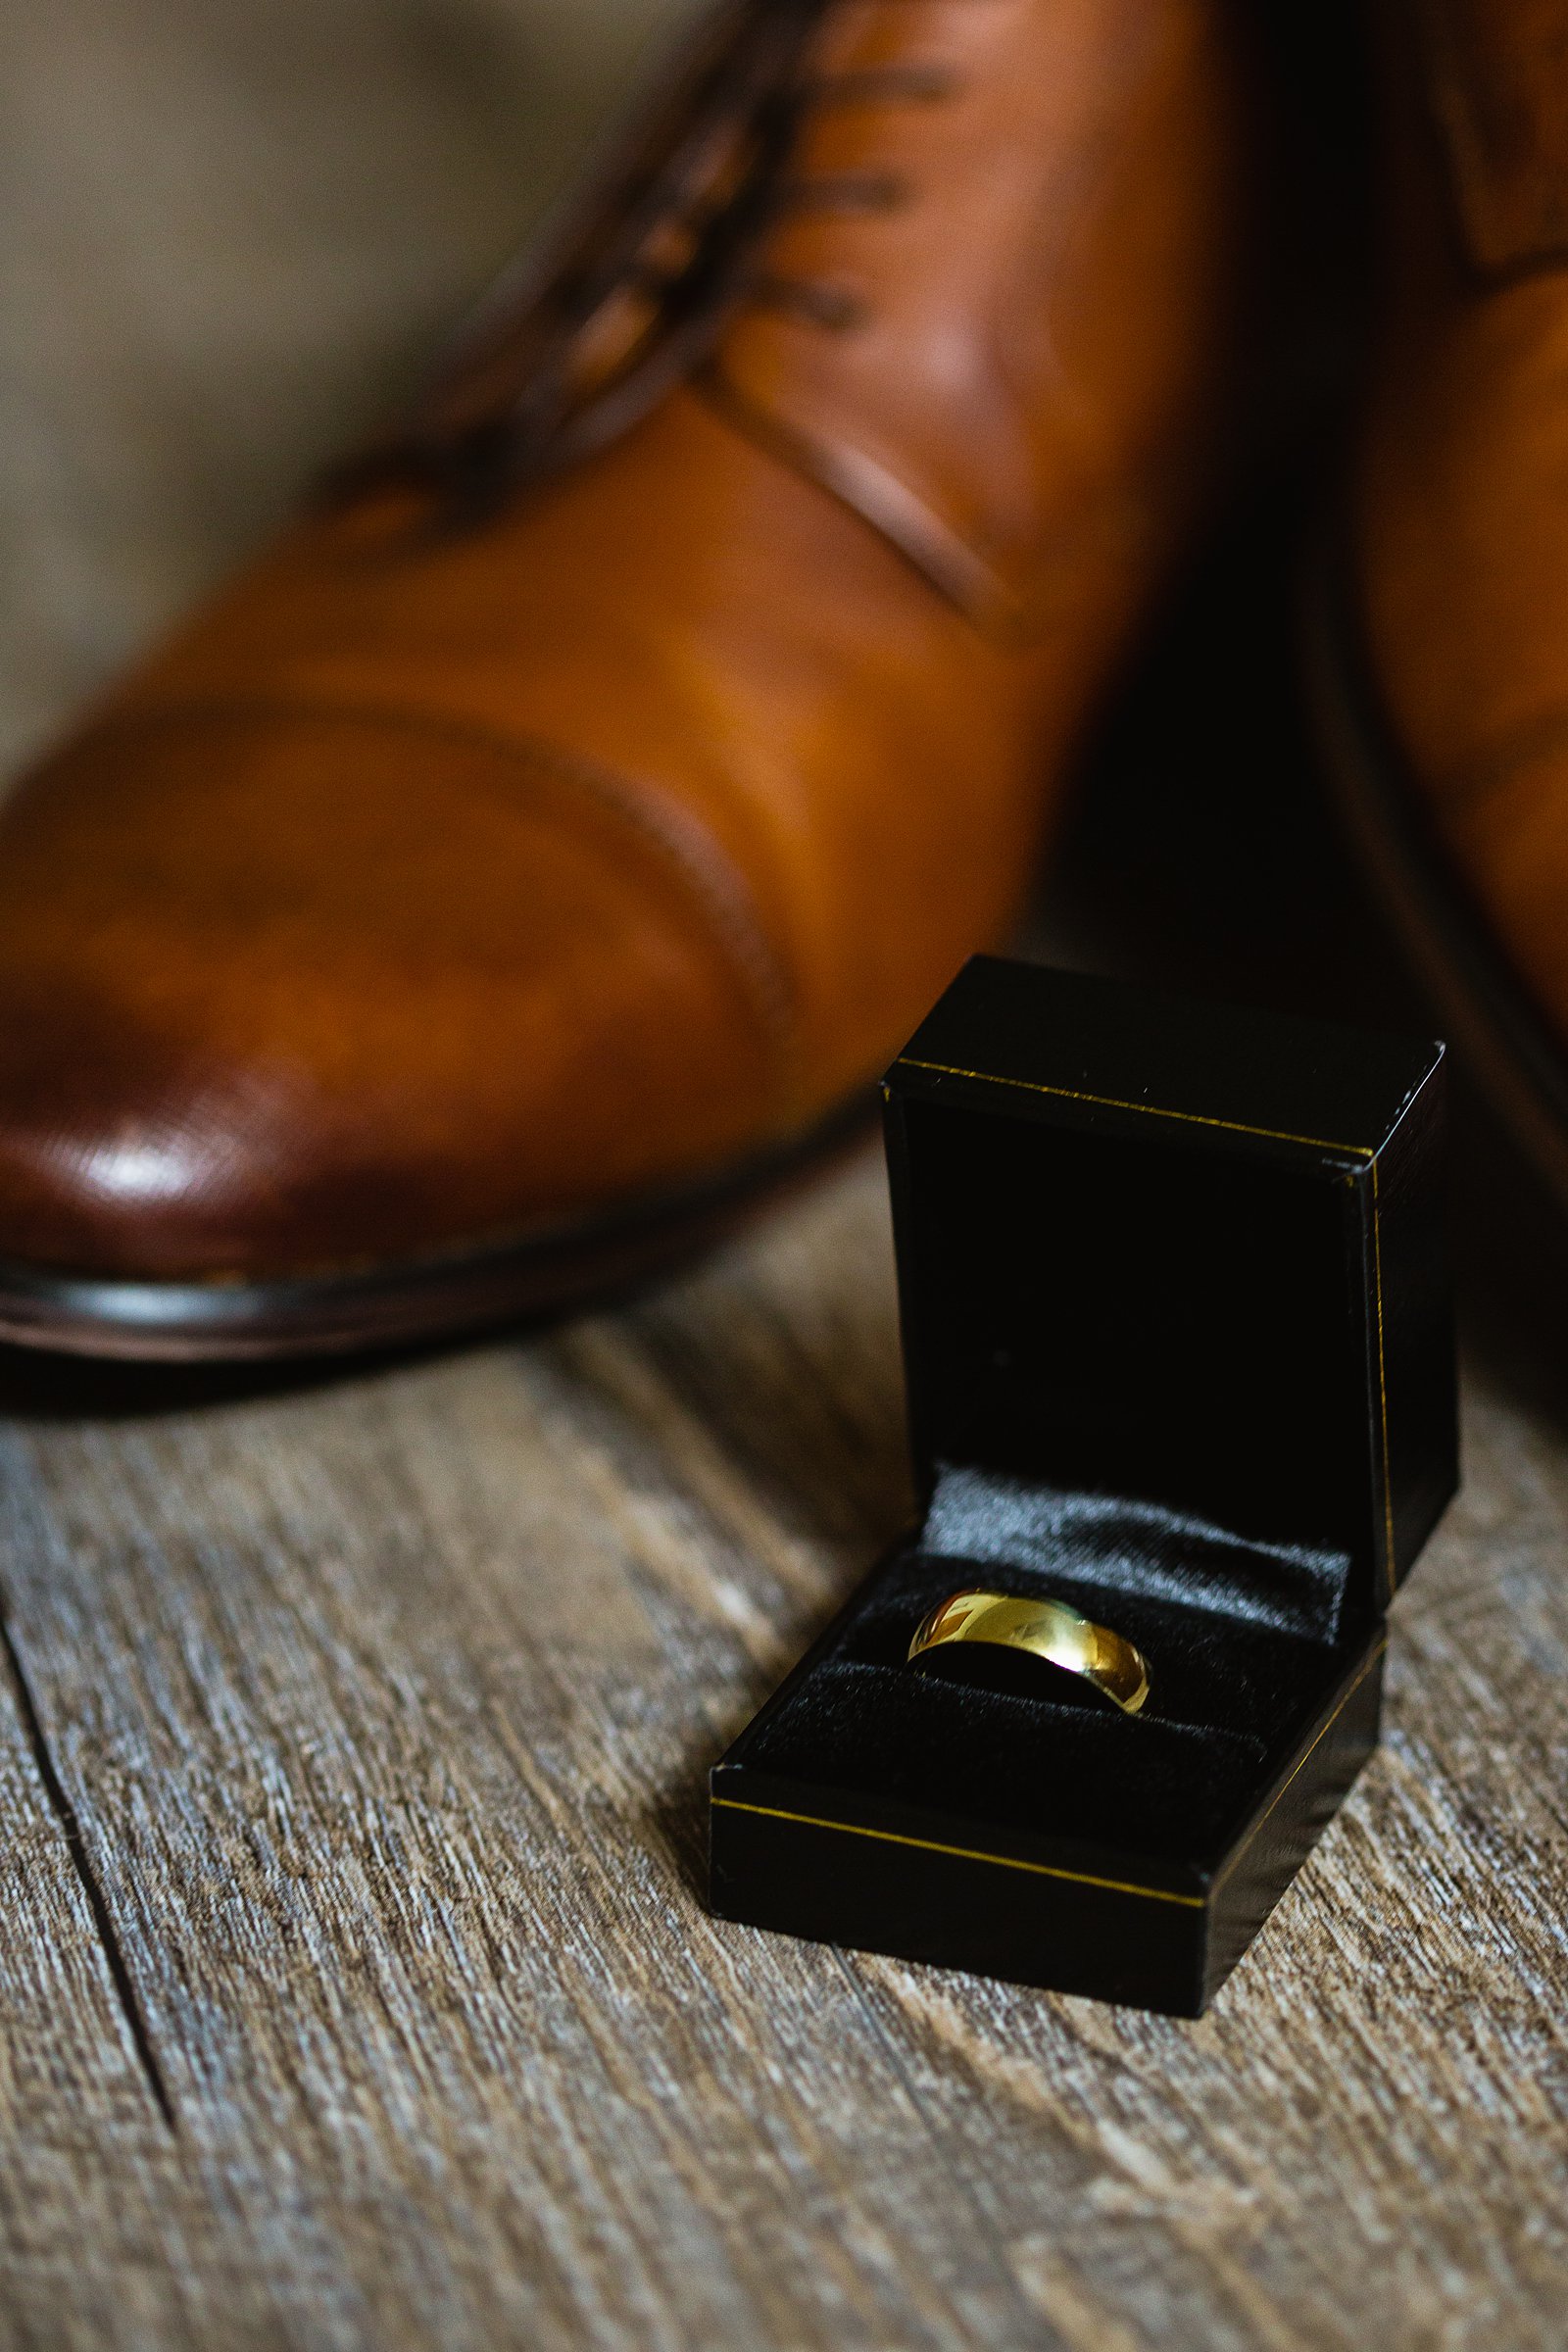 Simple gold wedding band in front of tan leather shoes by PMA Photography.